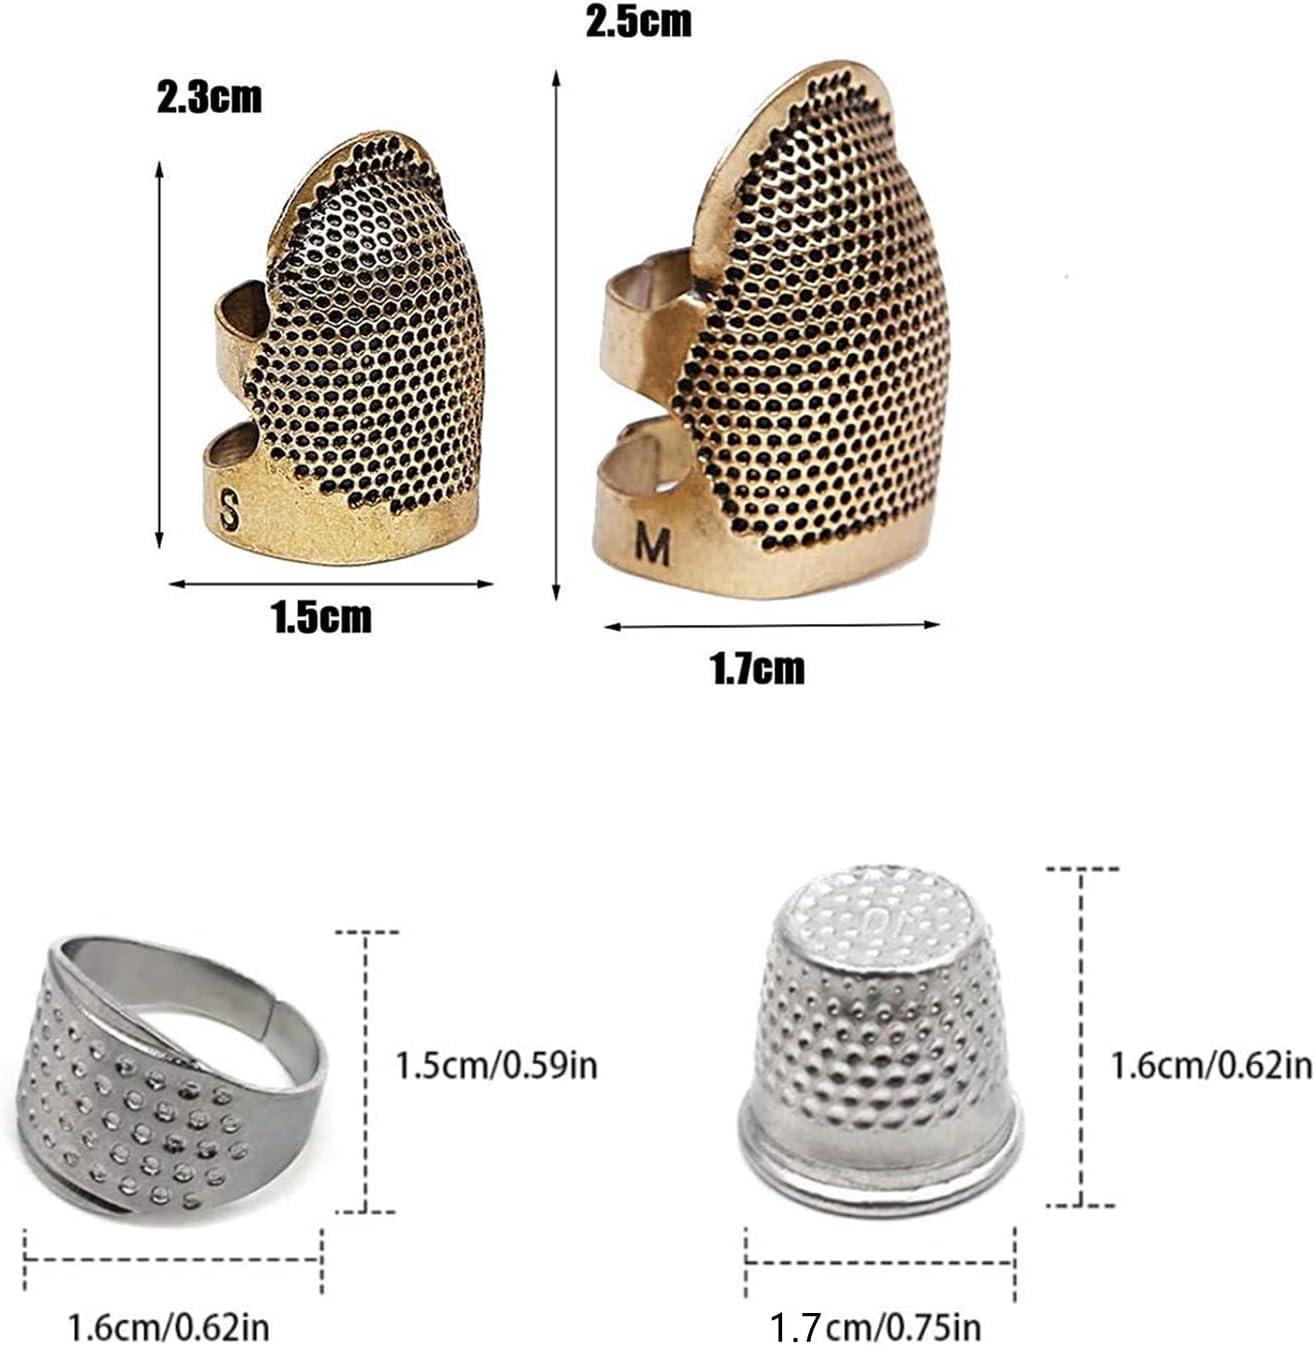 Buy Thimbles Online on Ubuy Kuwait at Best Prices